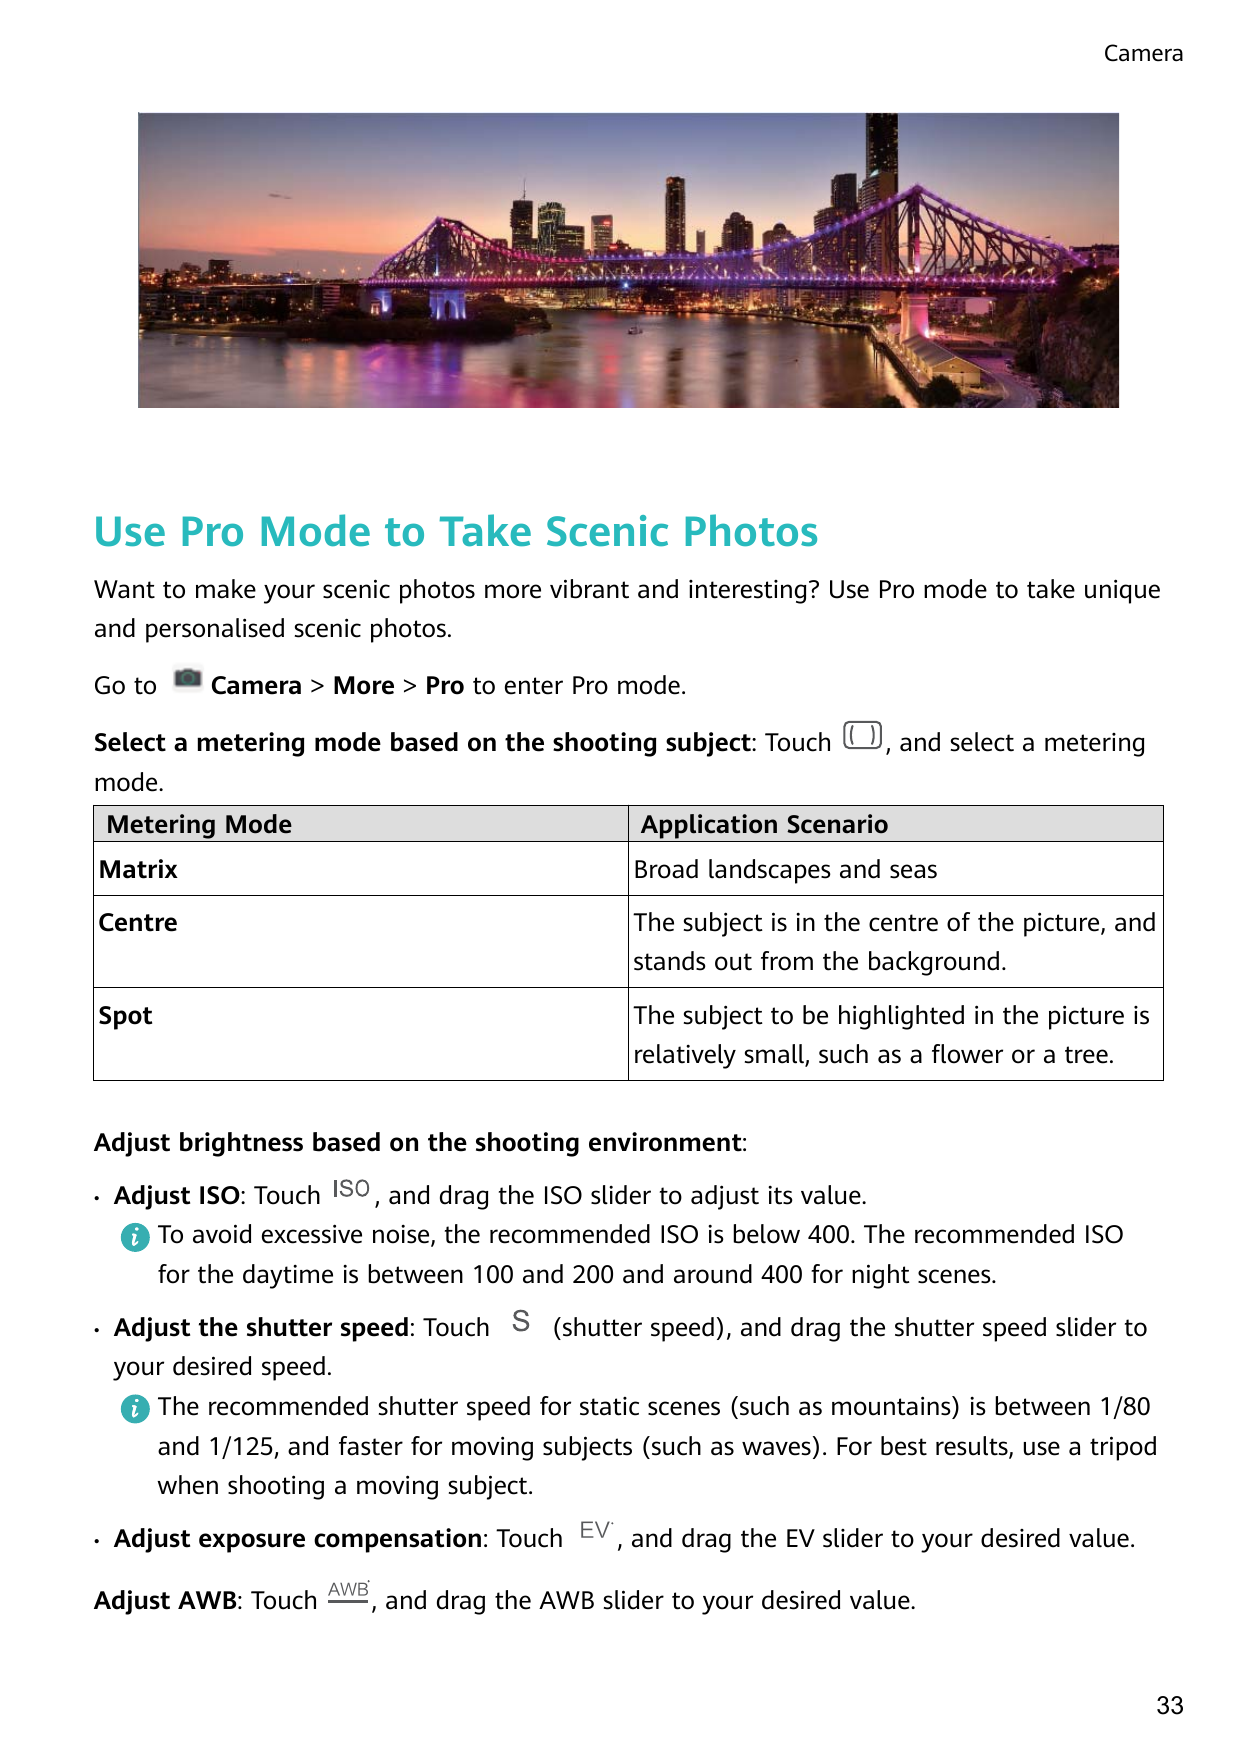 CameraUse Pro Mode to Take Scenic PhotosWant to make your scenic photos more vibrant and interesting? Use Pro mode to take uniqu